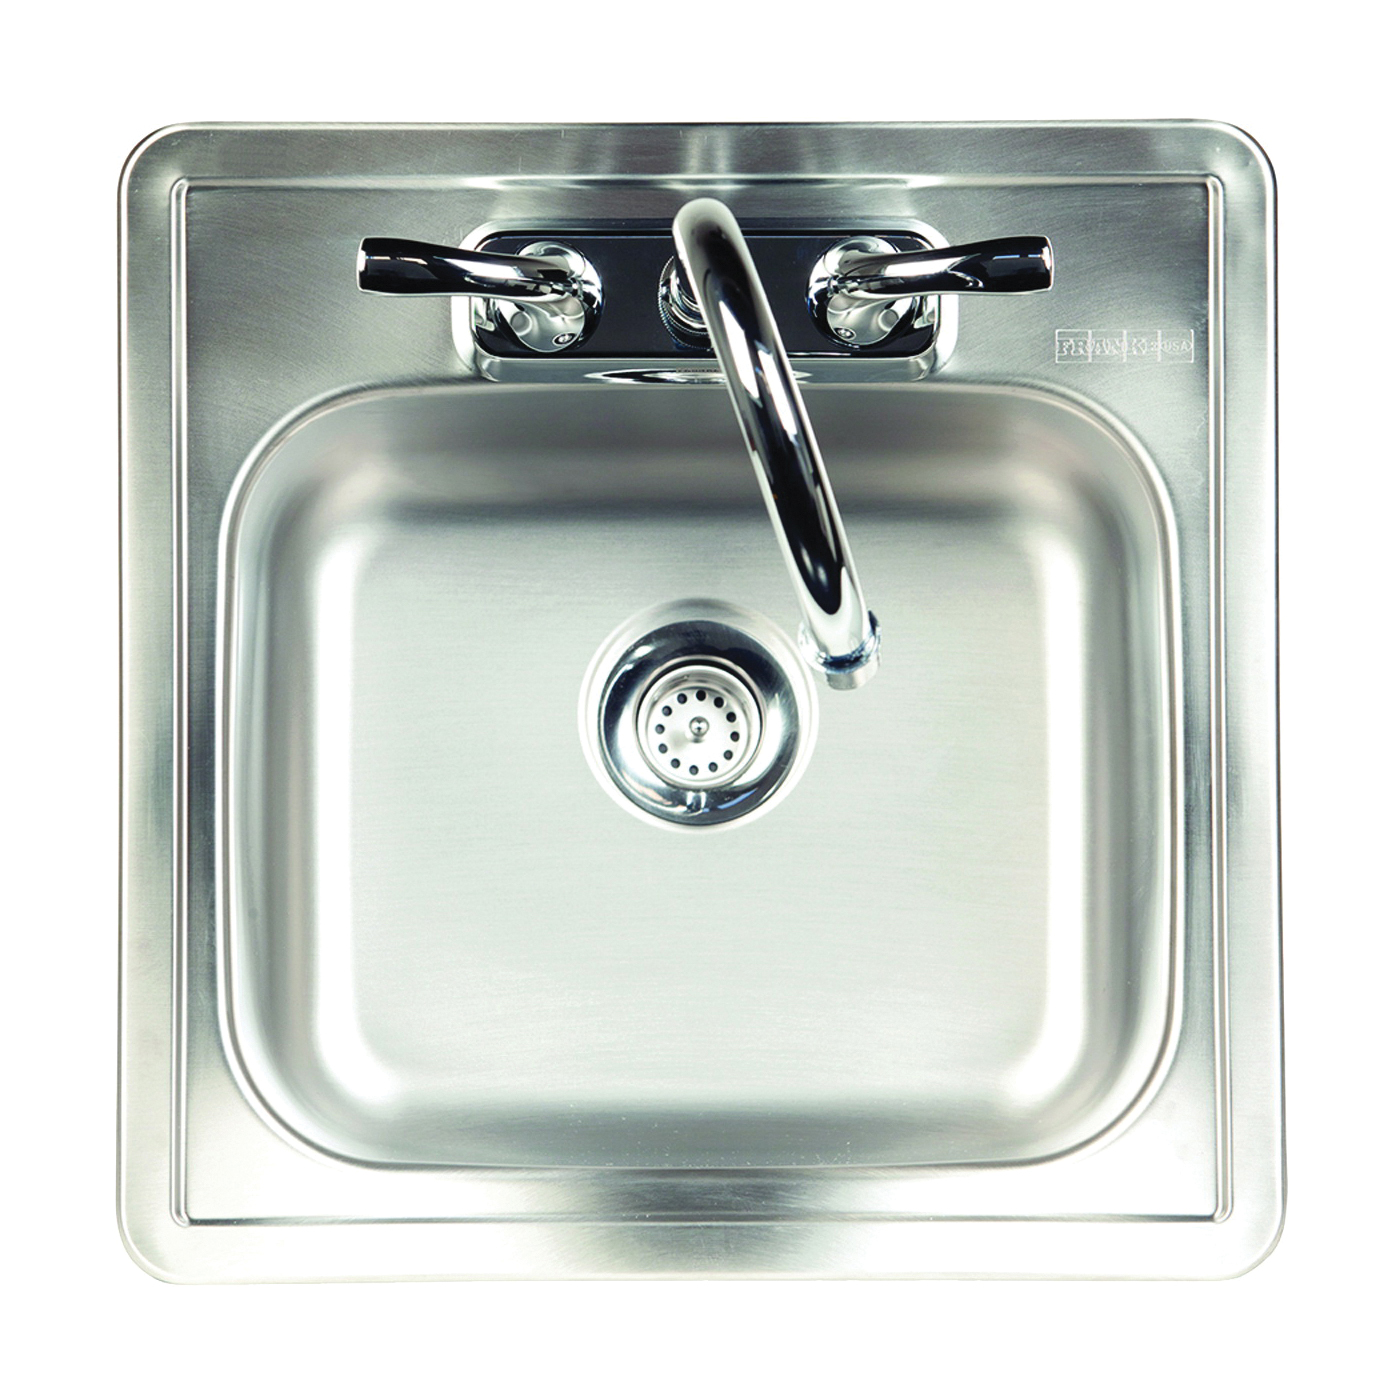 FBFS602NKIT Bar/Utility Sink, 2-Hole, 15 in L x 6 in W x 15 in H Dimensions, Stainless Steel, Satin, 1-Bowl